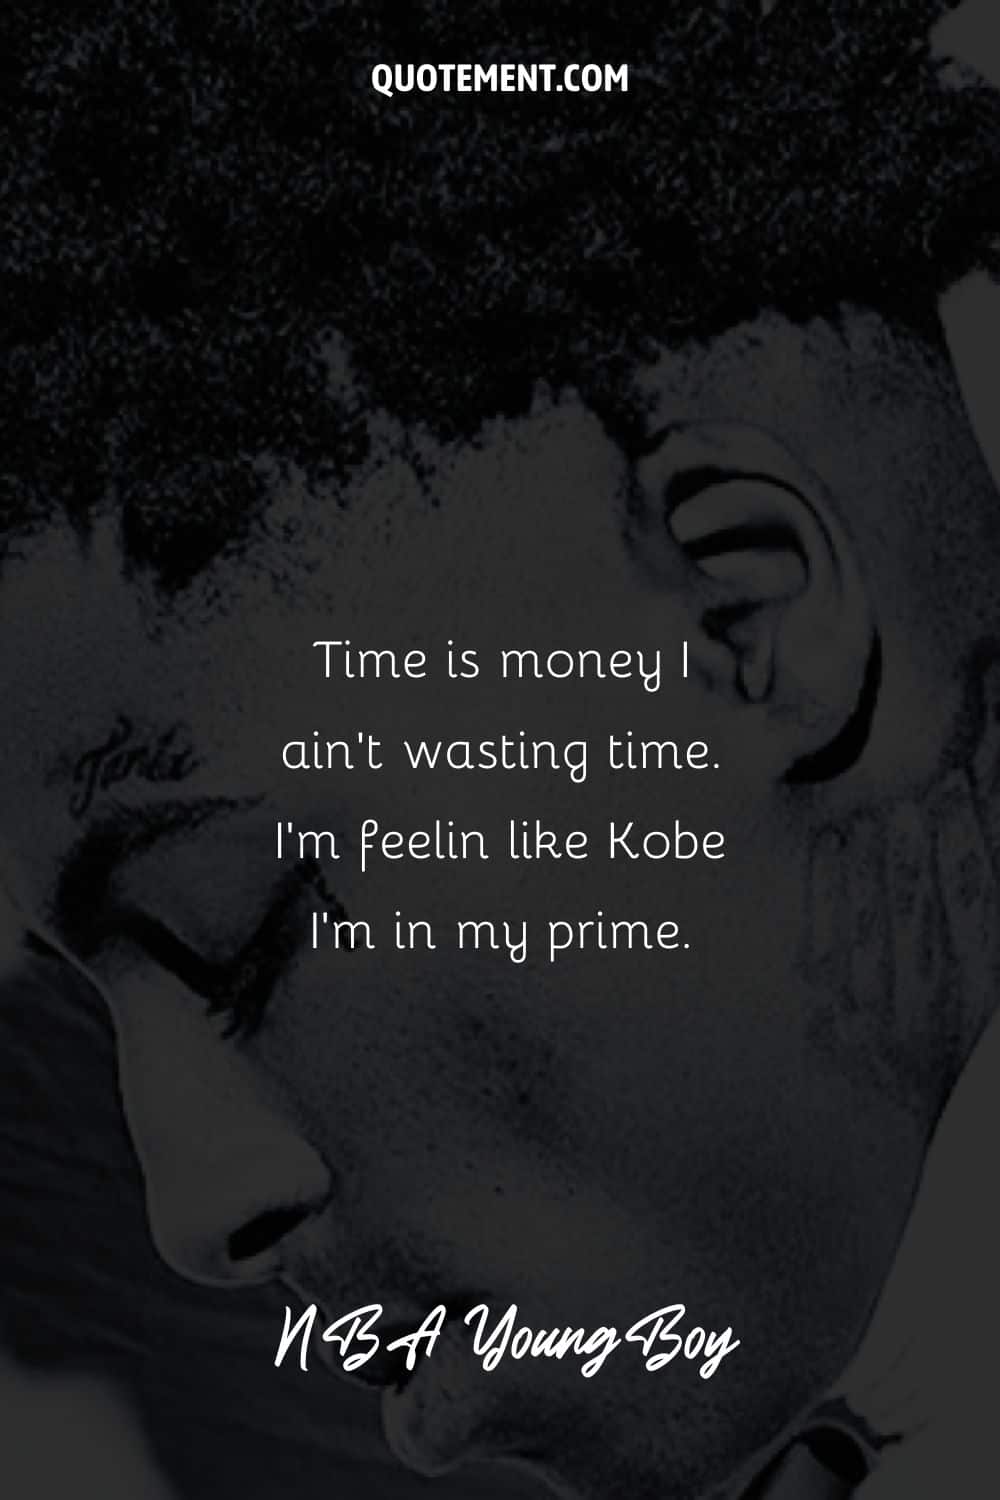 “Time is money I ain’t wasting time. I’m feelin like Kobe I’m in my prime.” – NBA YoungBoy, “Hell and Back”